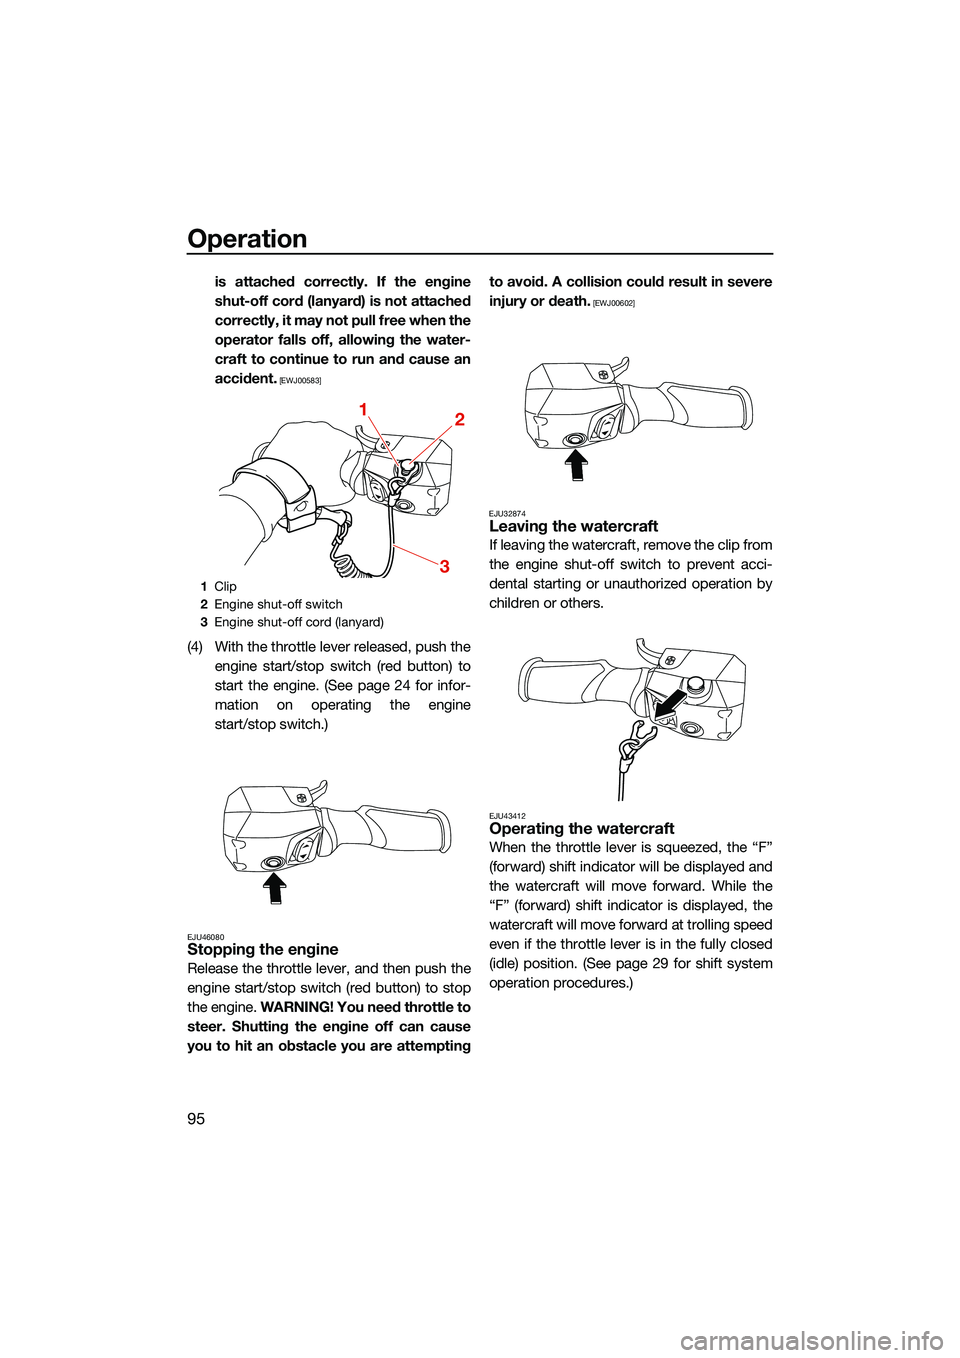 YAMAHA FX HO CRUISER 2022 Owners Guide Operation
95
is attached correctly. If the engine
shut-off cord (lanyard) is not attached
correctly, it may not pull free when the
operator falls off, allowing the water-
craft to continue to run and 